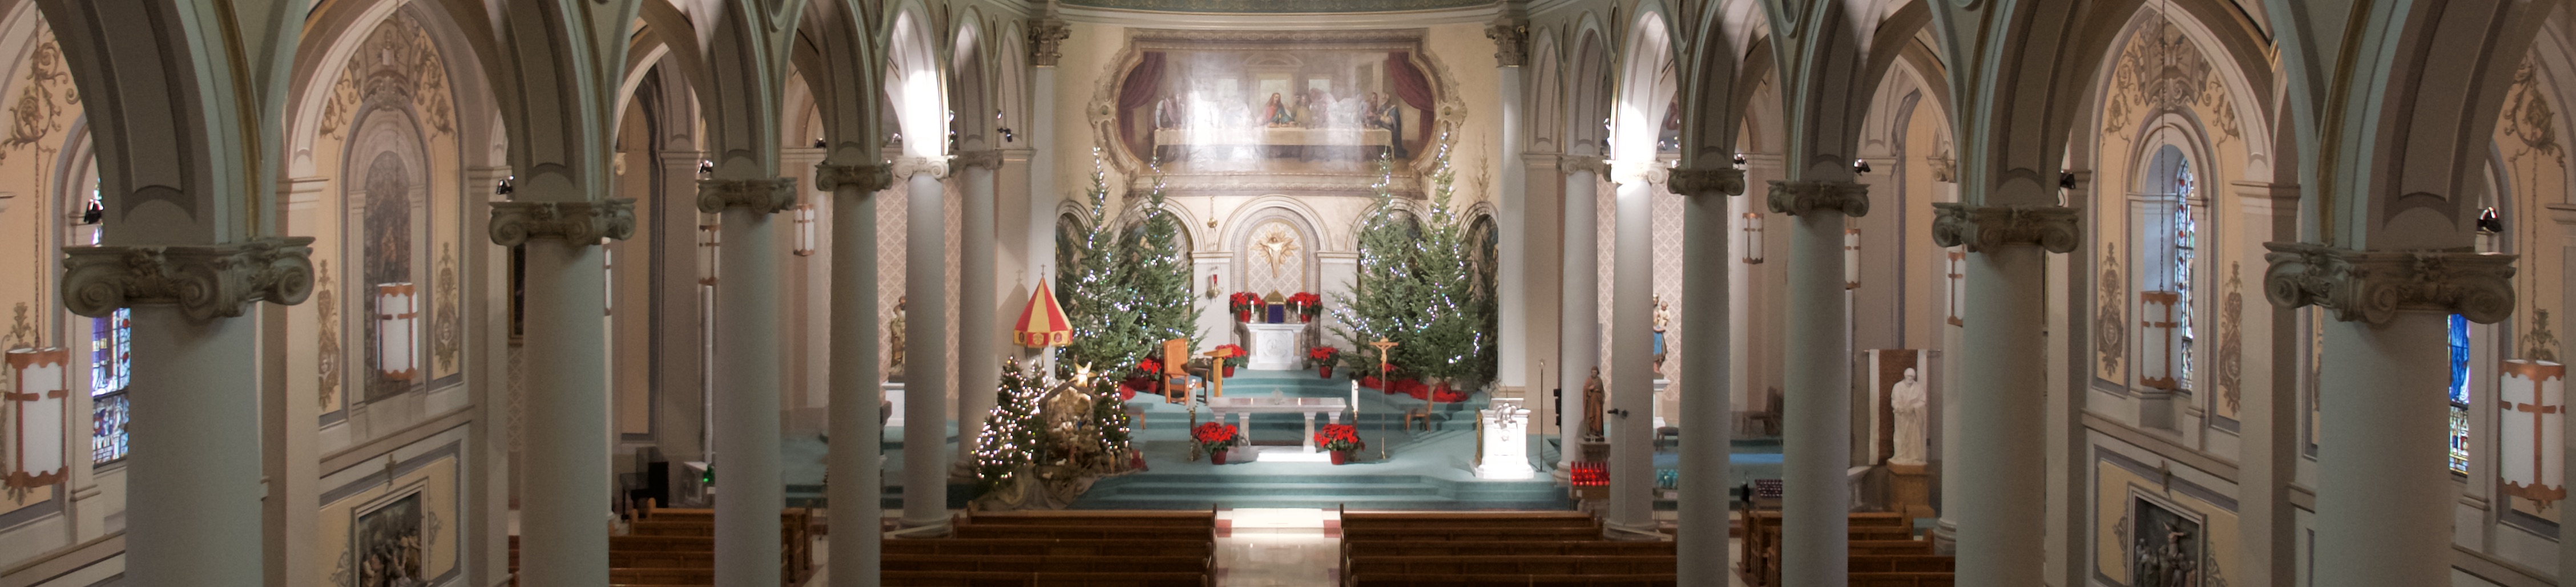 Sanctuary at Christmas with trees and creche